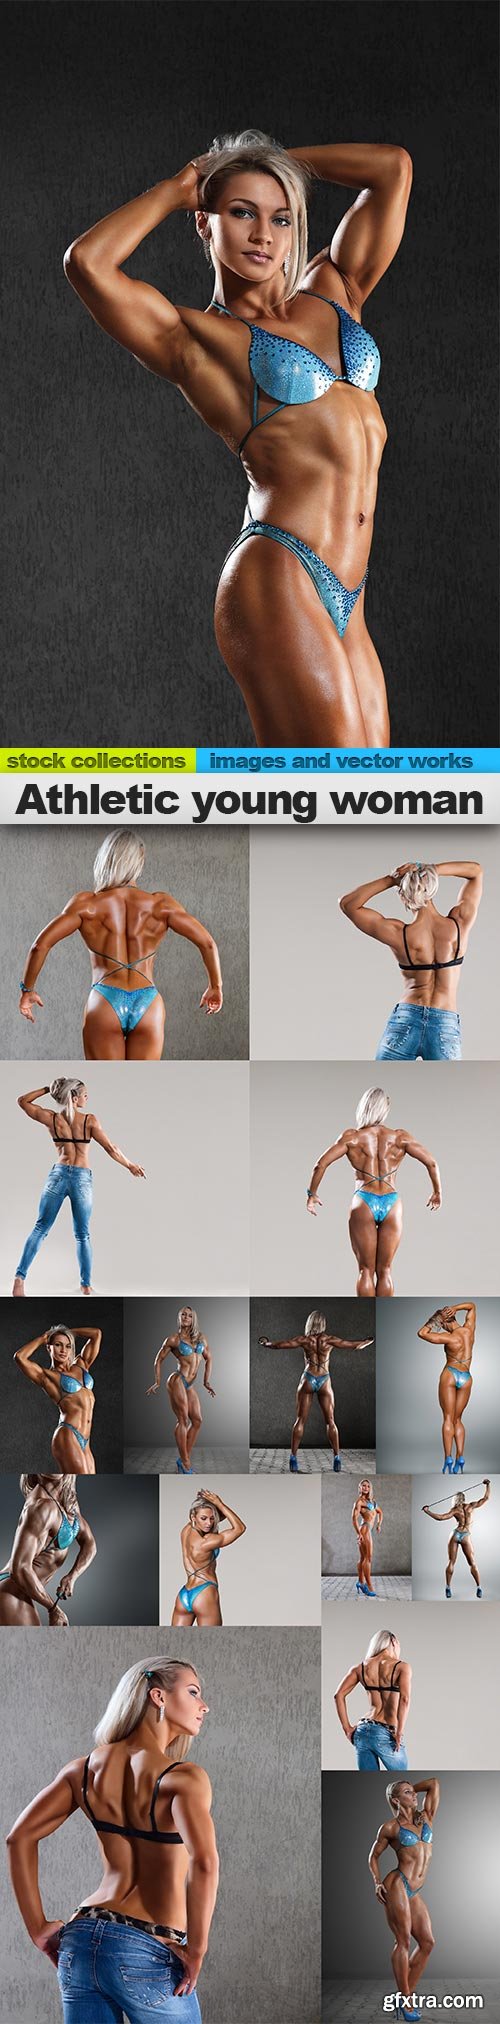 Athletic young woman, 15 x UHQ JPEG